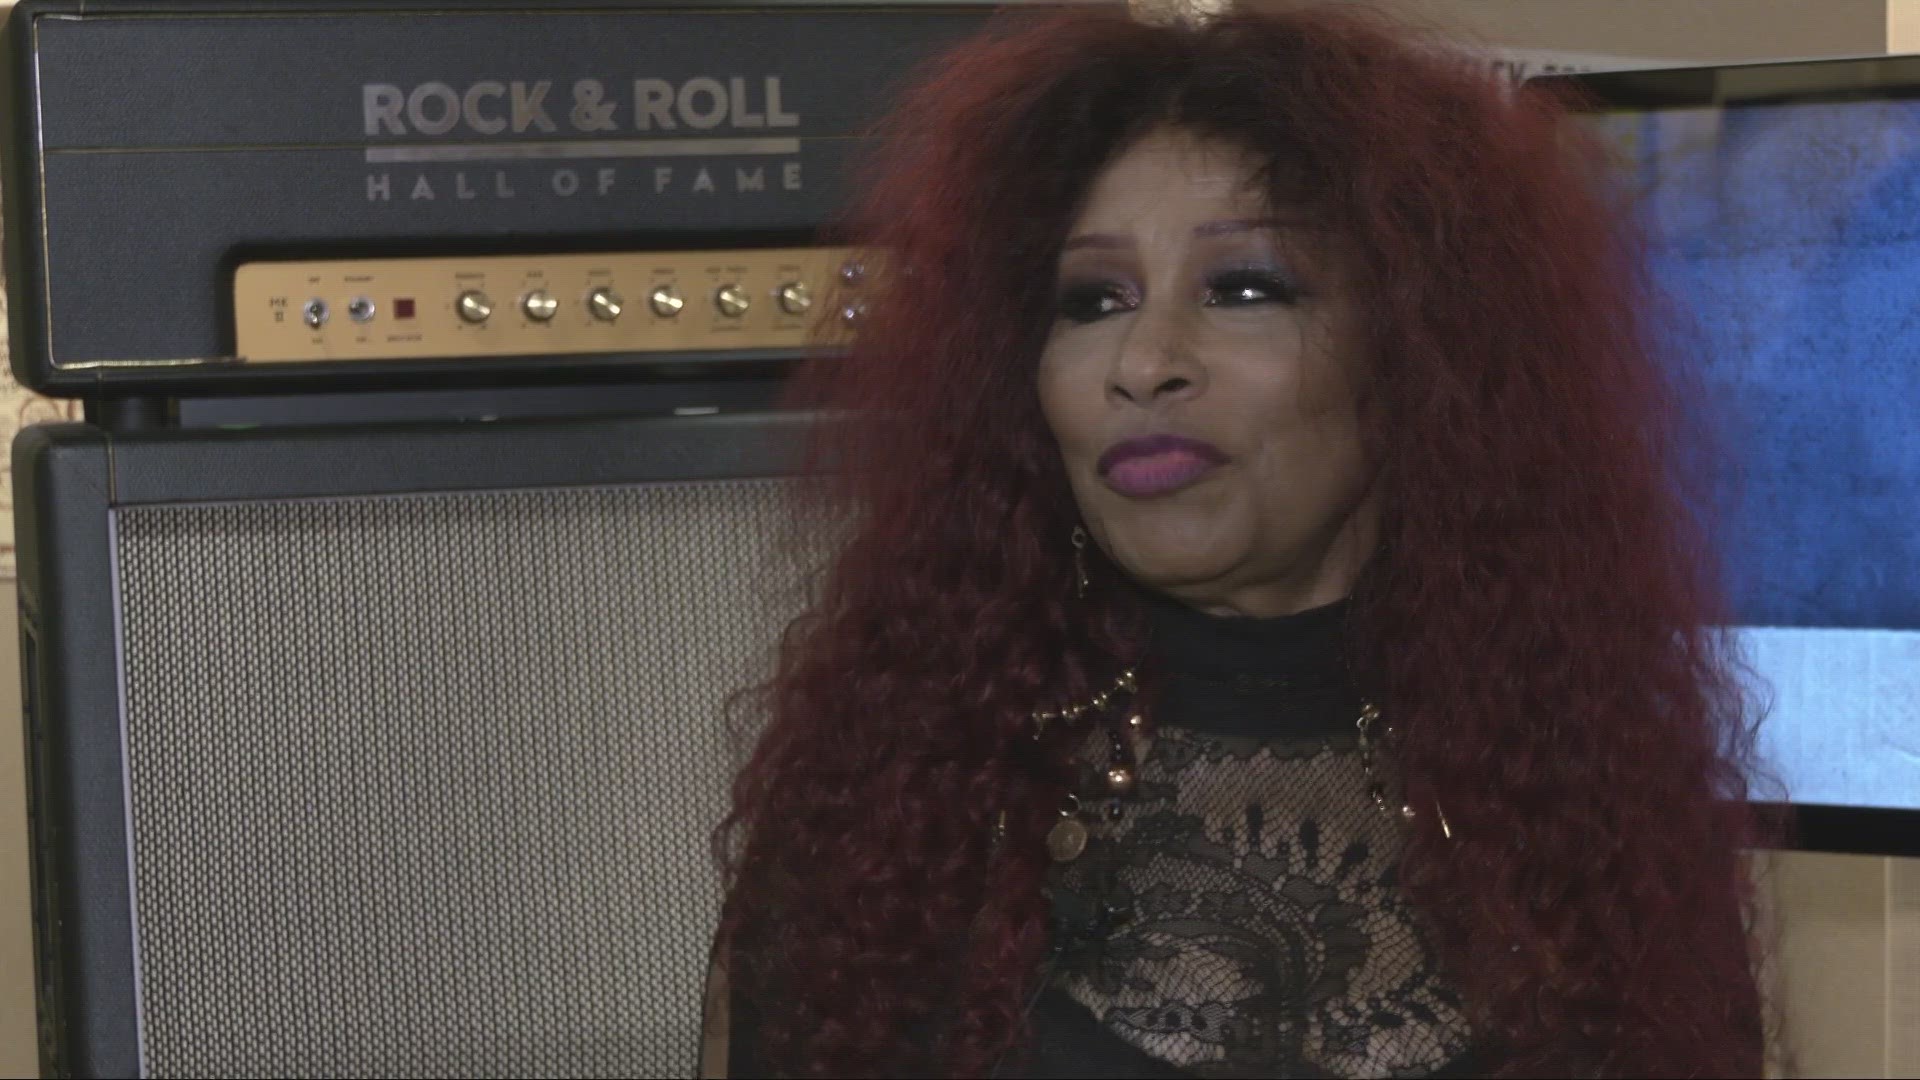 Chaka Khan visited her exhibit at the Rock Hall and also celebrated her 70th birthday.